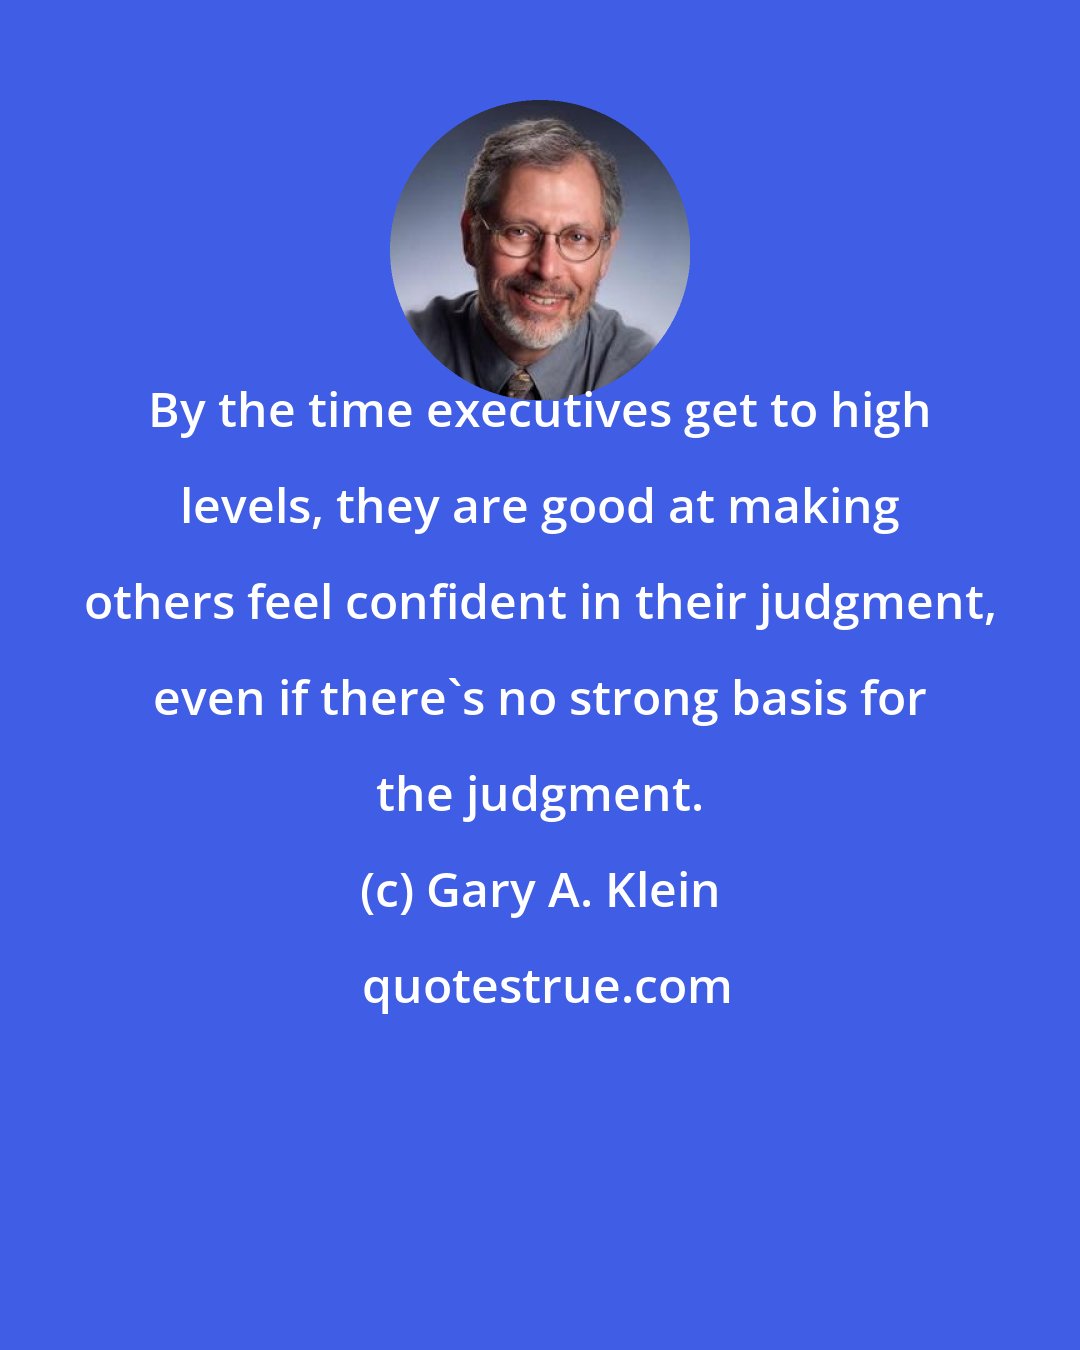 Gary A. Klein: By the time executives get to high levels, they are good at making others feel confident in their judgment, even if there's no strong basis for the judgment.